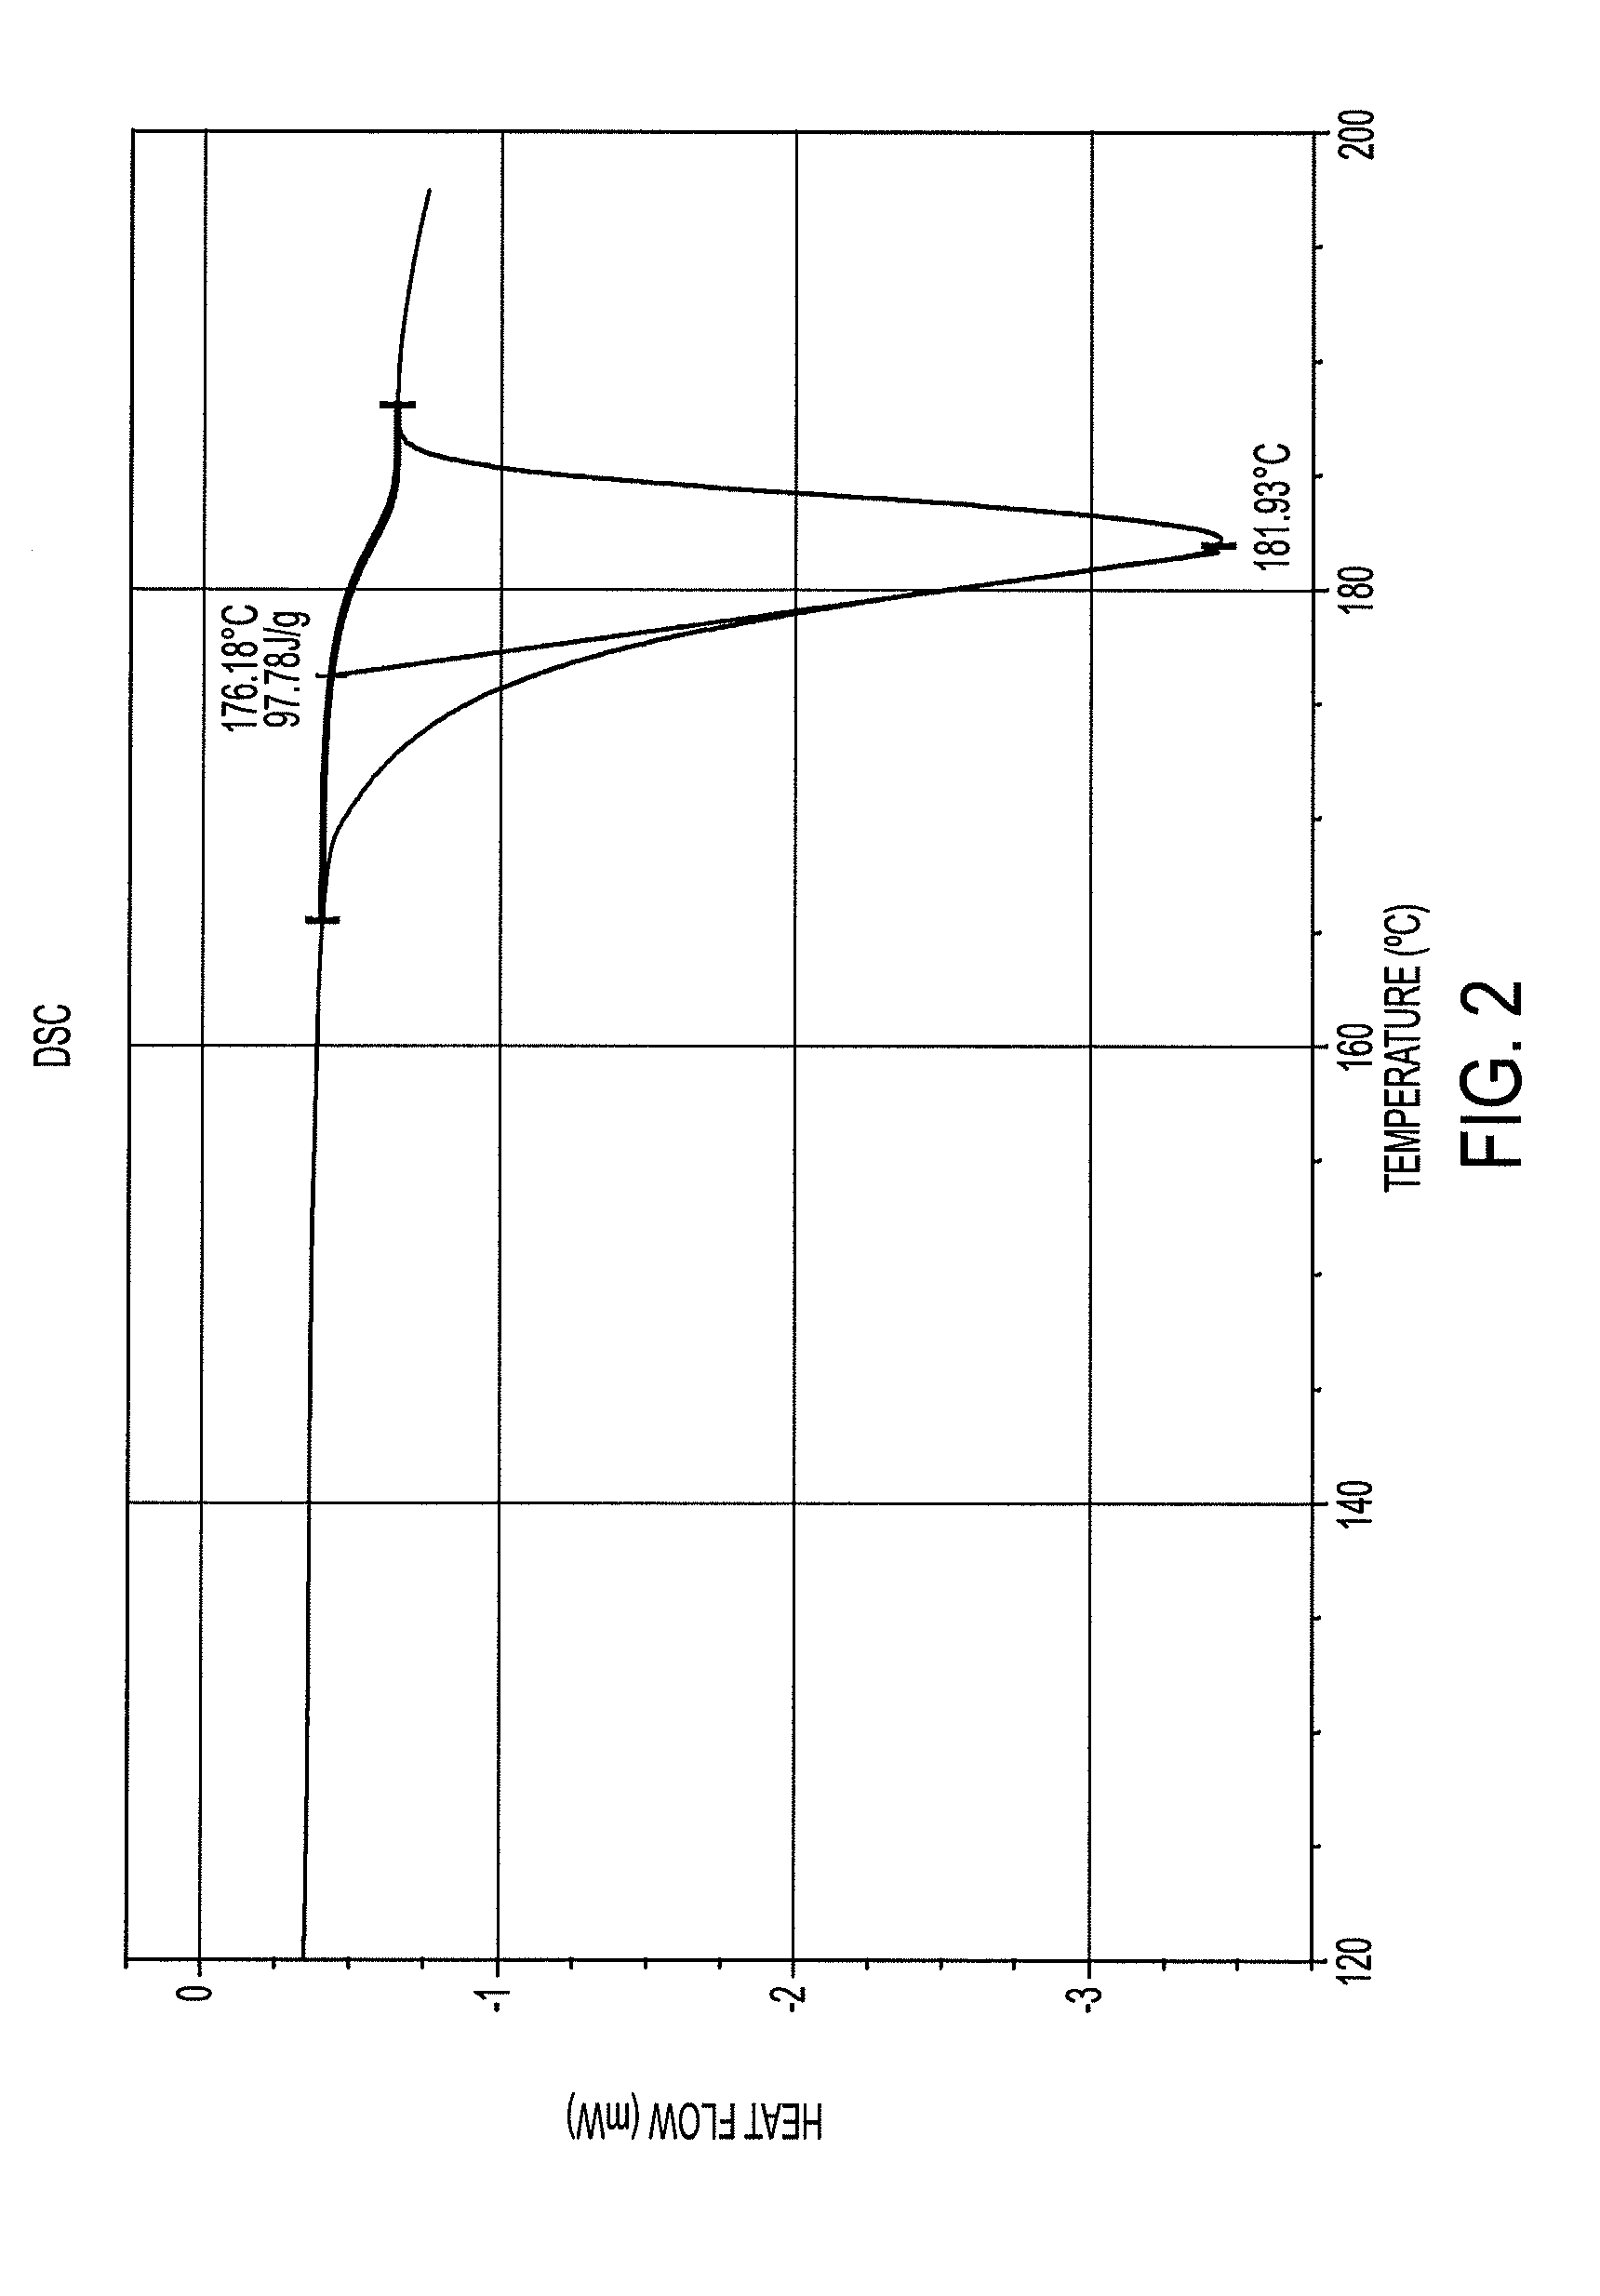 Process for preparation of crystalline clopidogrel hydrogen sulphate form i